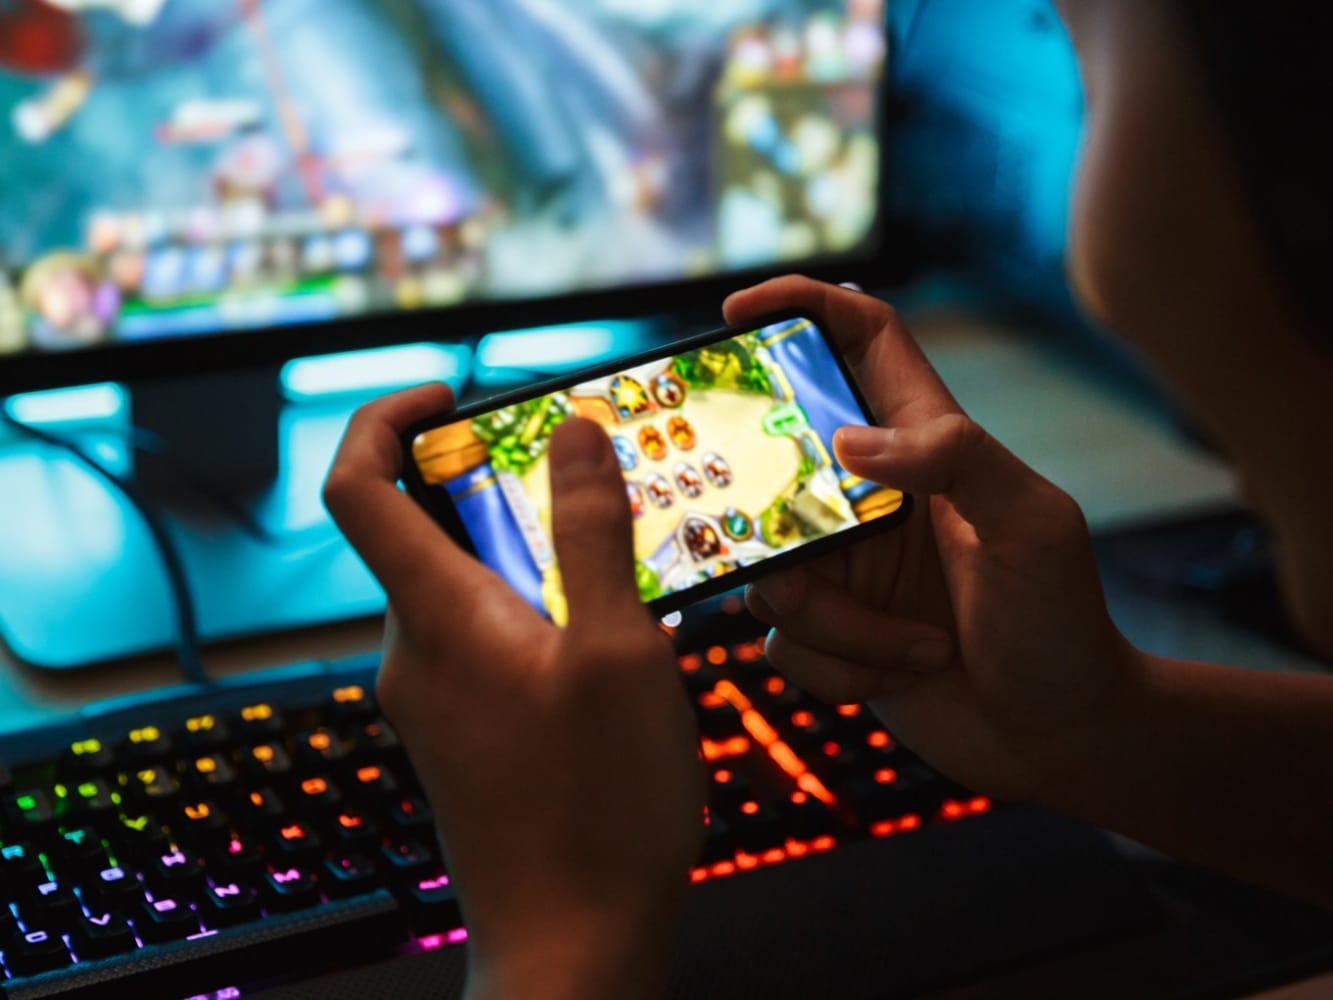 Games to play with family: Cross-platform remote games